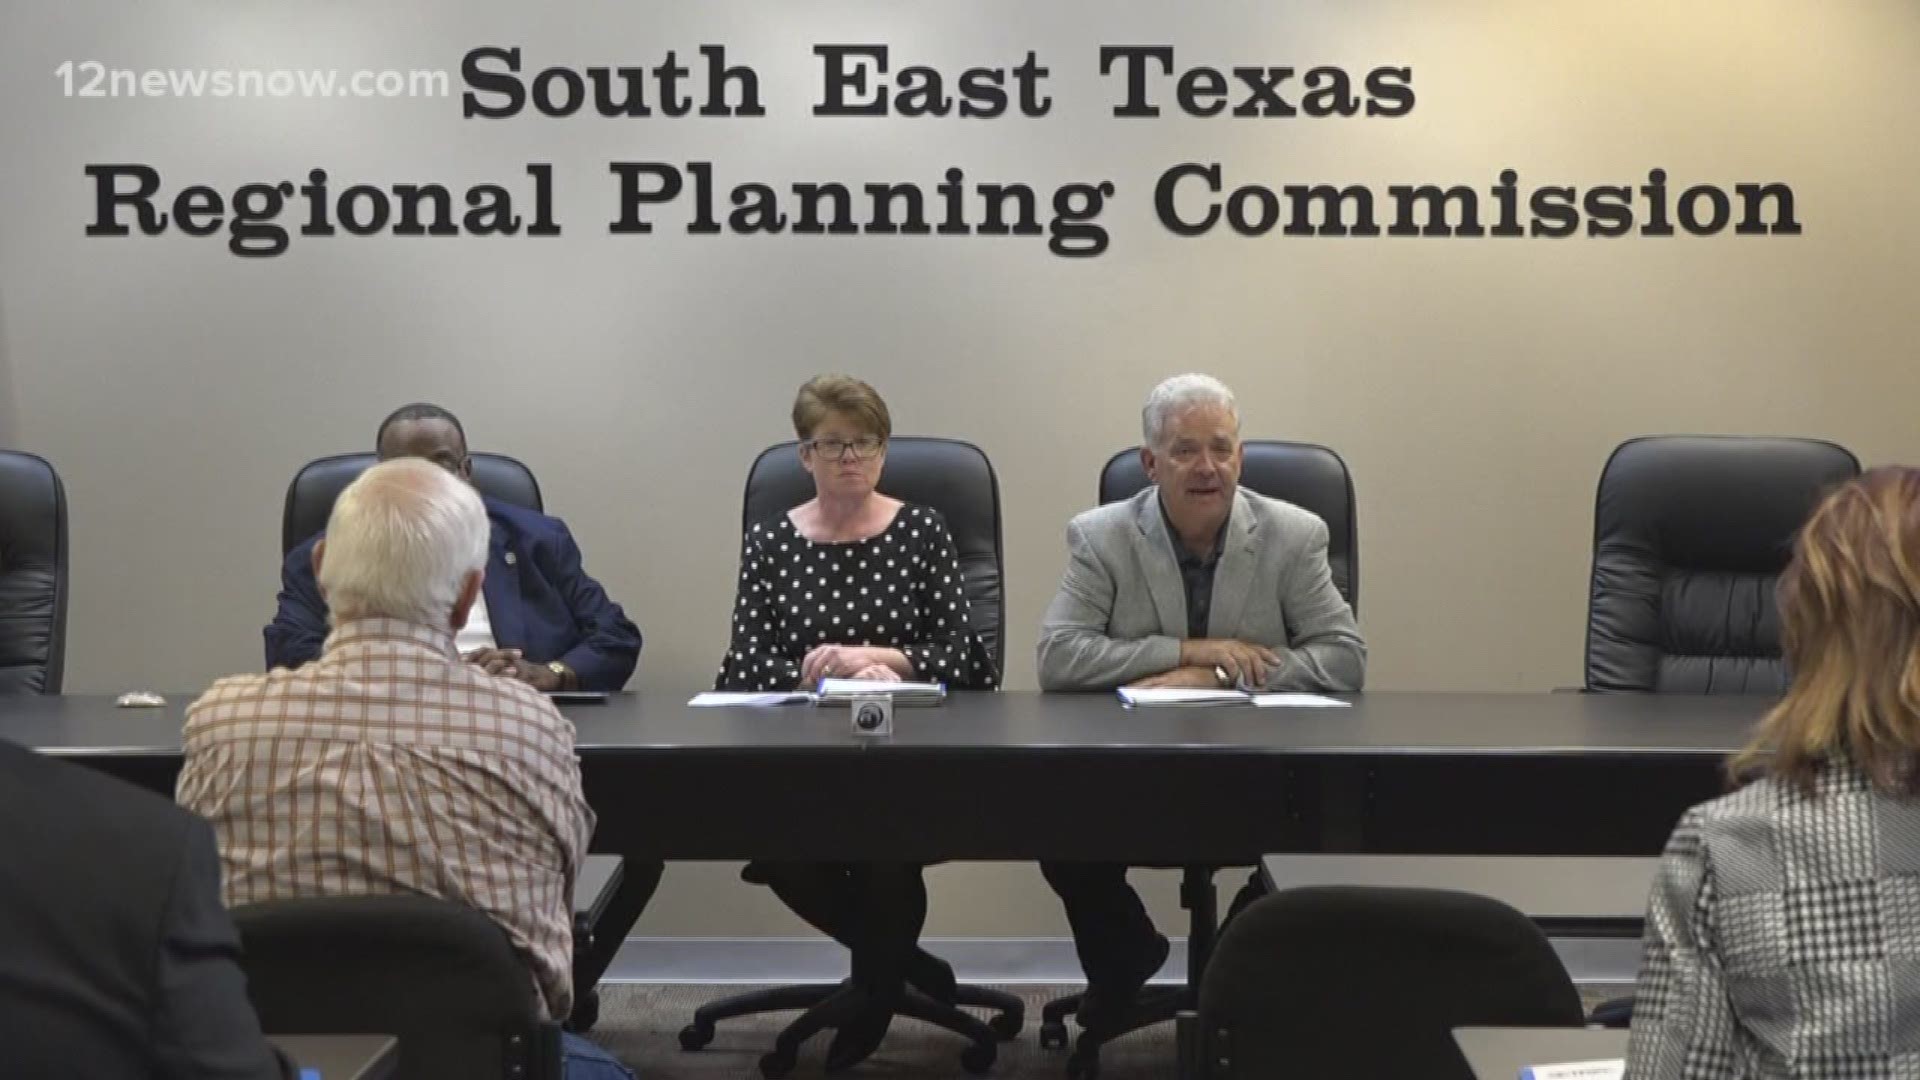 The South East Texas Regional Planning Commission met to discuss the importance of the census and how to participate on April 1, 2020.